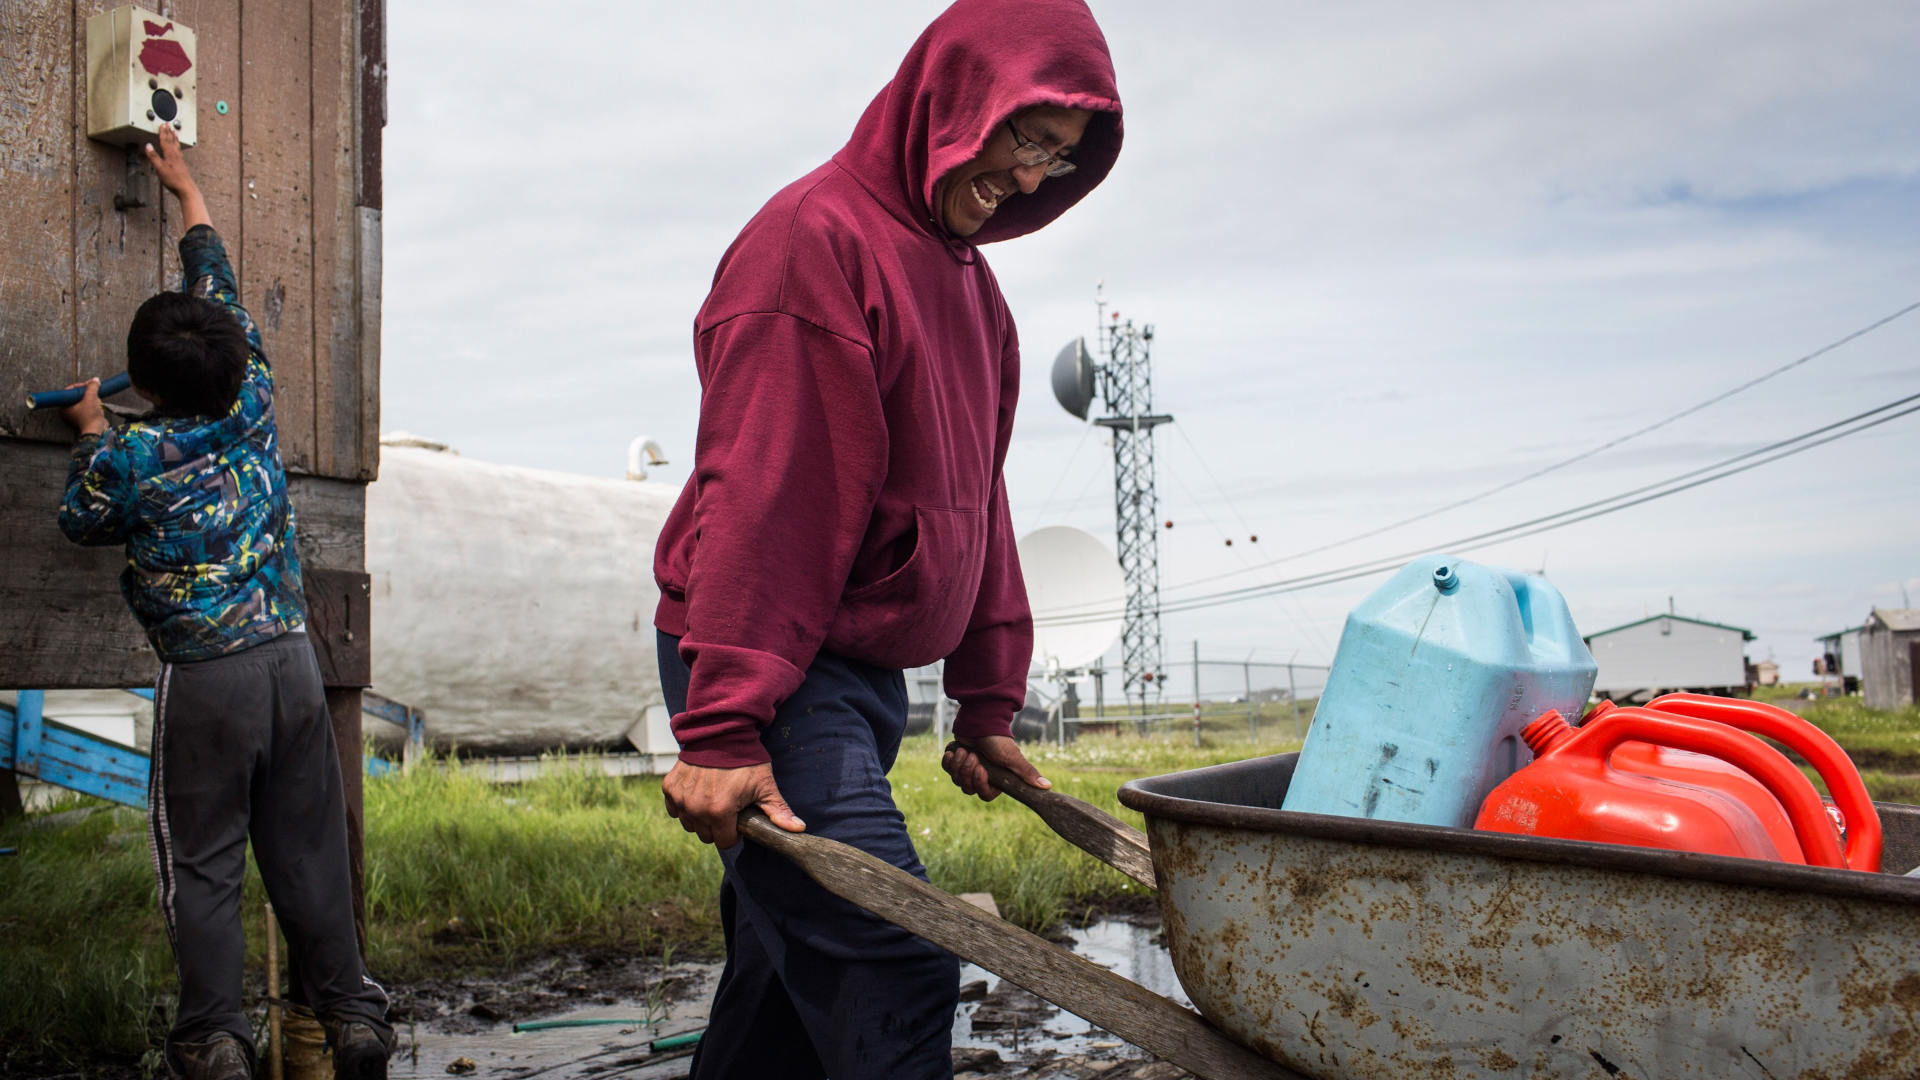 In Newtok, Alaska, Joseph John Jr. collects fresh water for his family in 2015. After decades of planning, most of the town relocated in 2019 due to unlivable conditions caused by climate change.